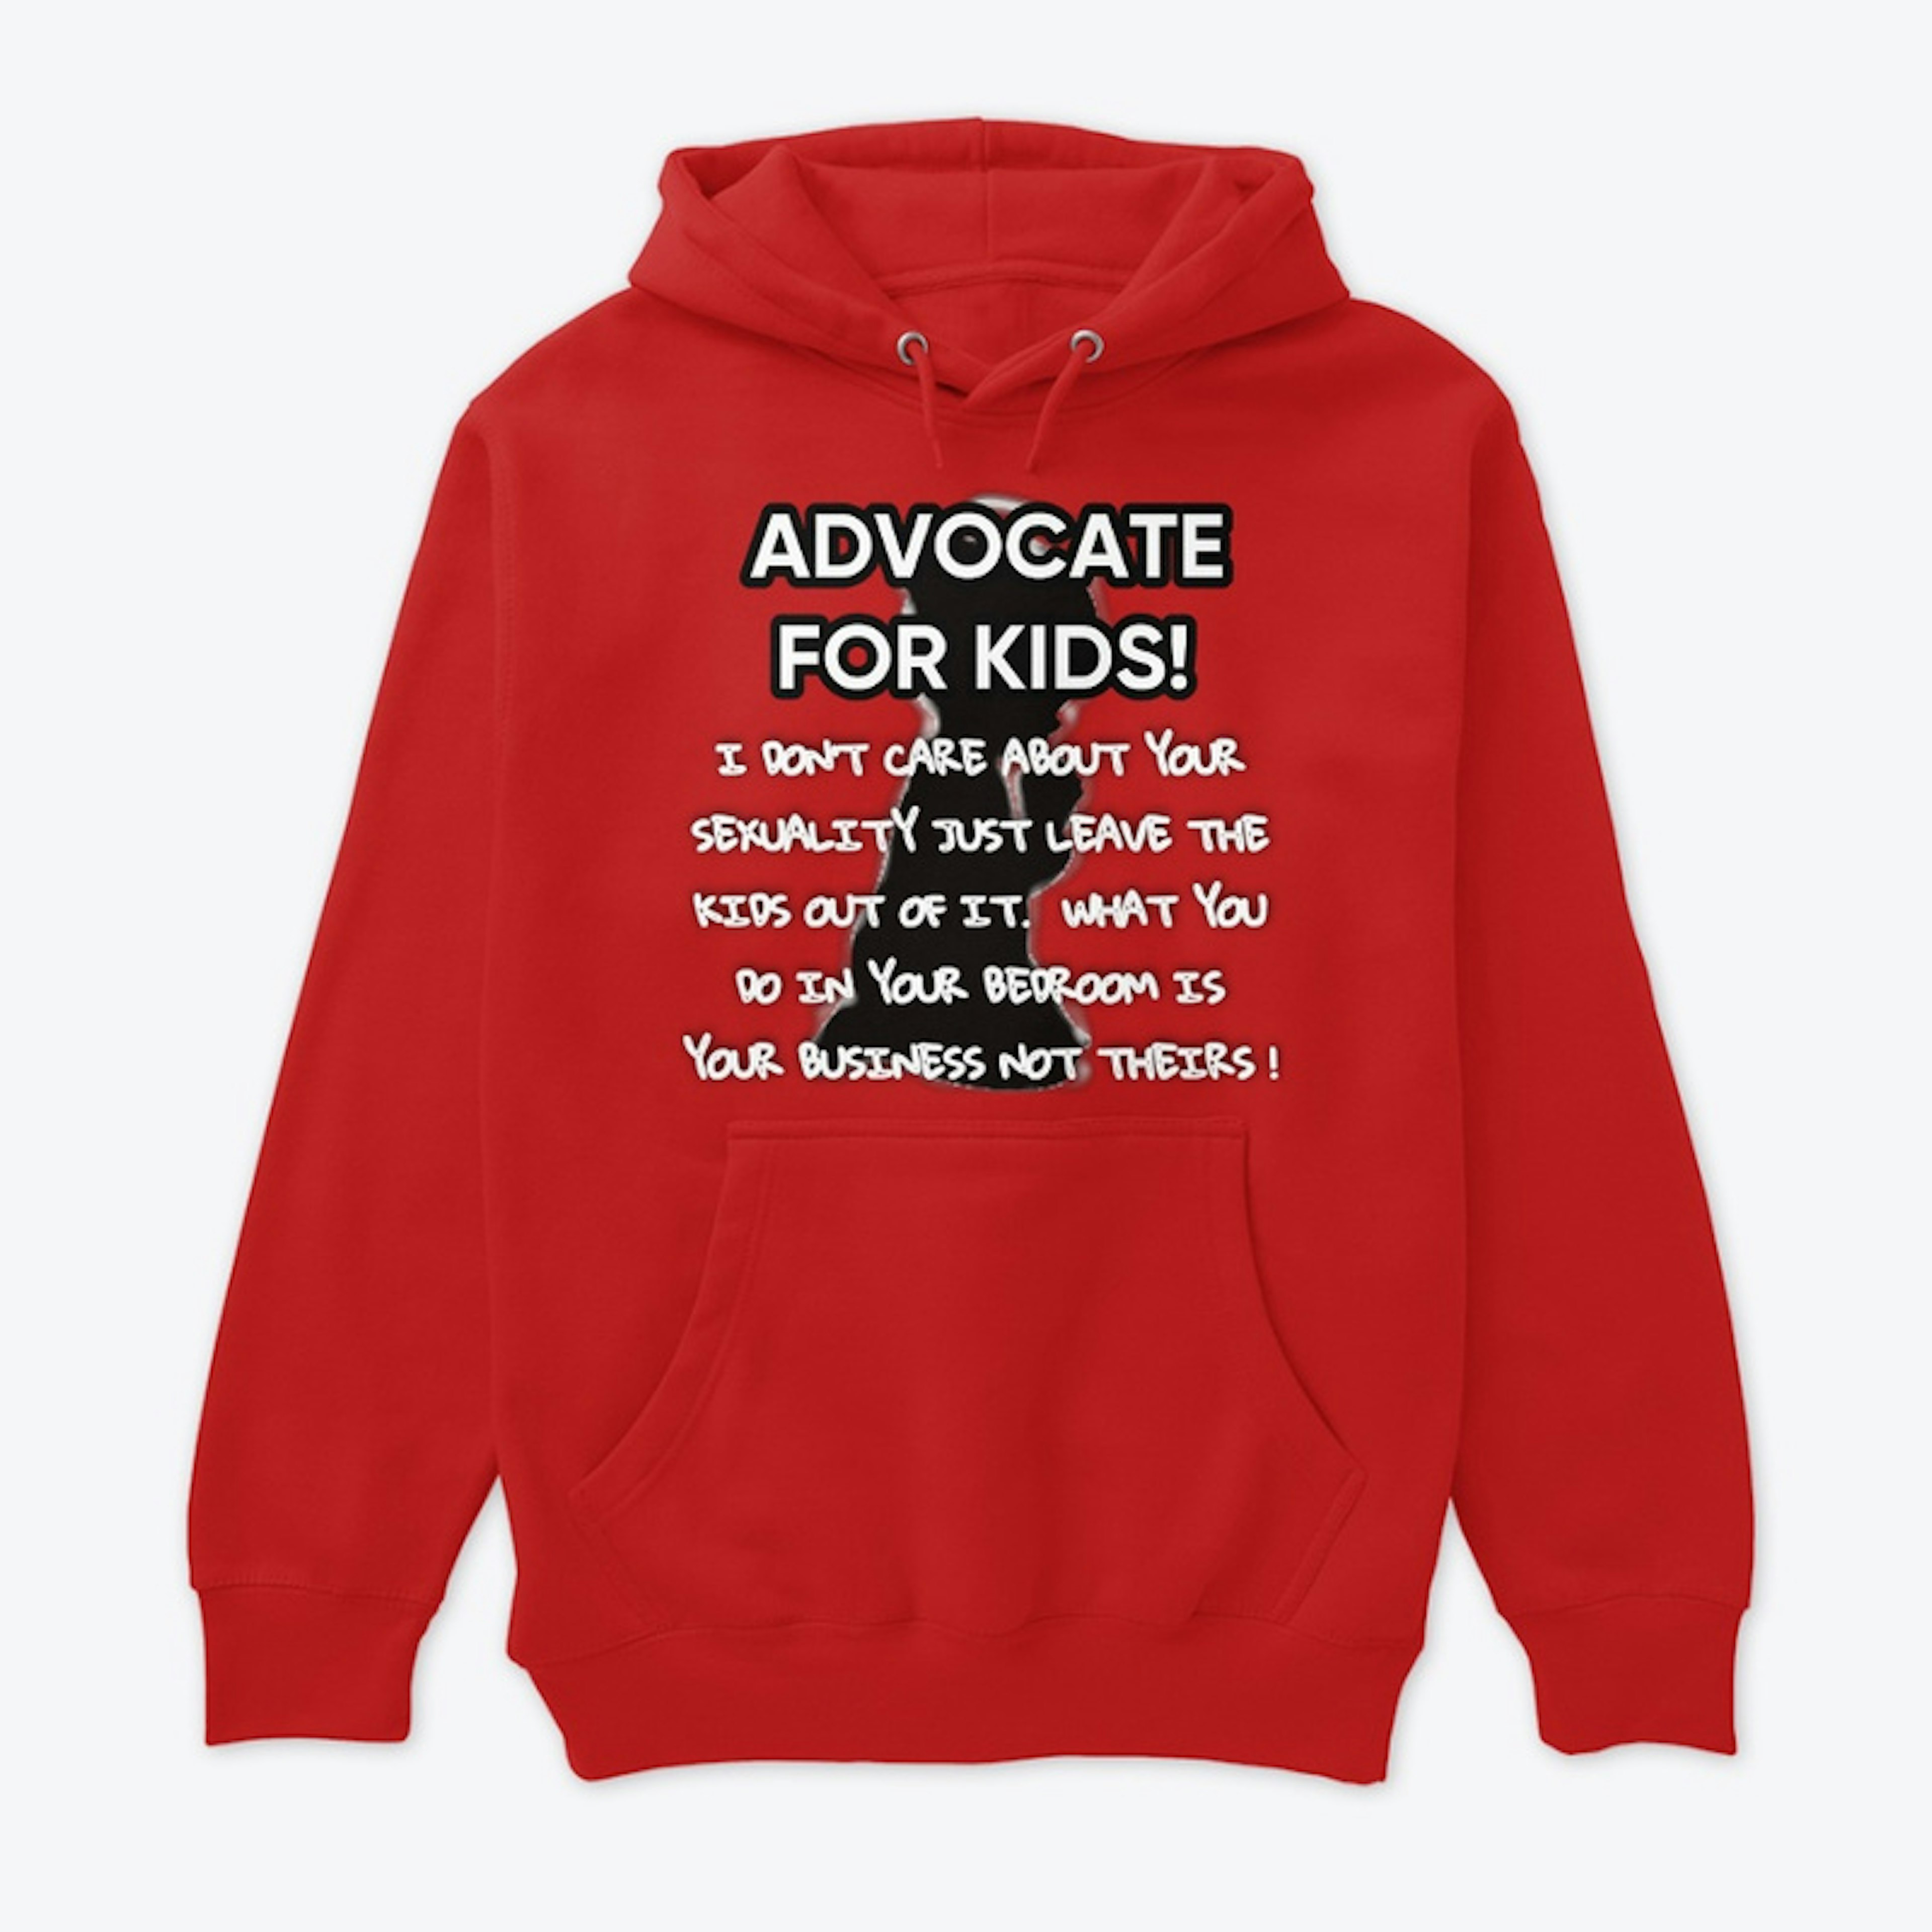 ADVOCATE FOR KIDS